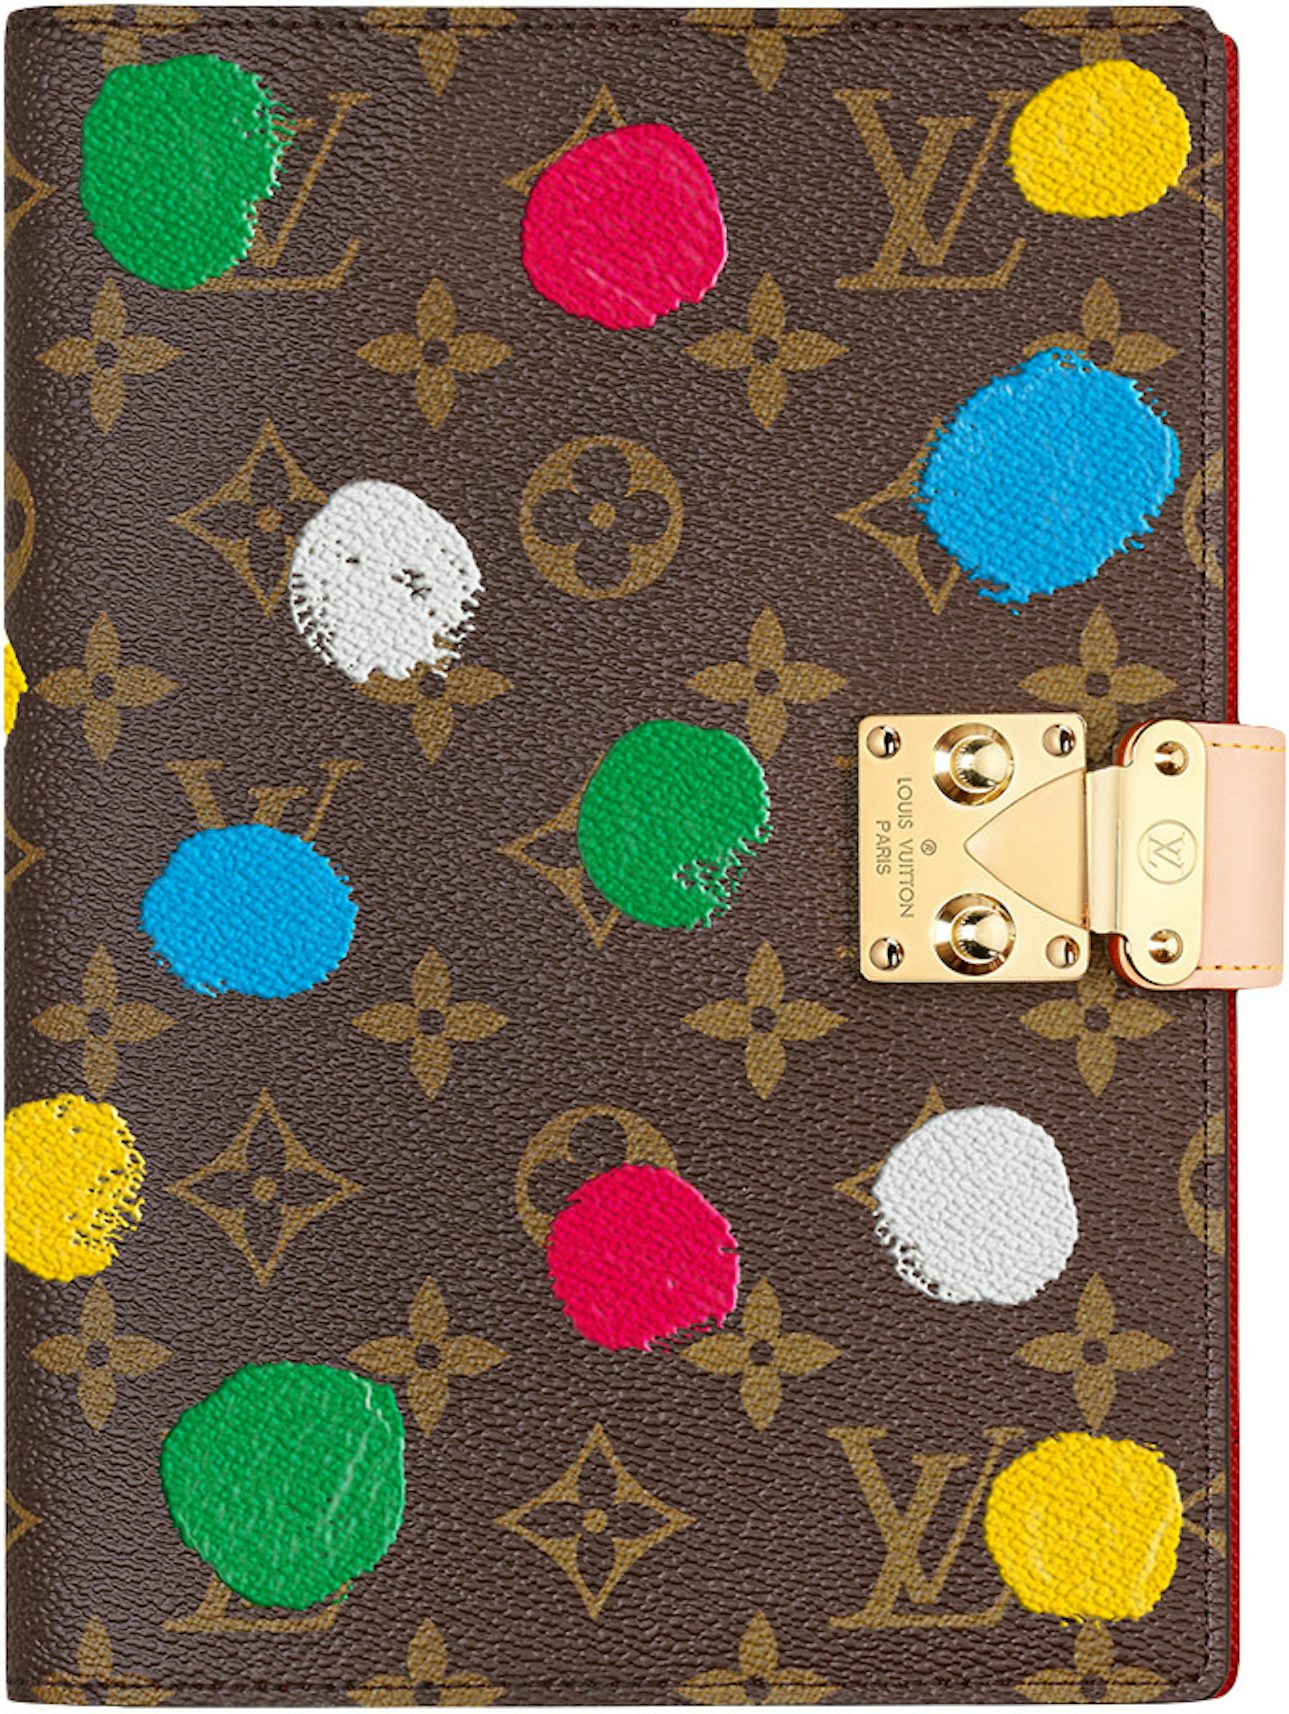 Louis Vuitton x Yayoi Kusama Speedy Bandouliere 25 Monogram Multicolor in  Coated Canvas with Gold-tone - US